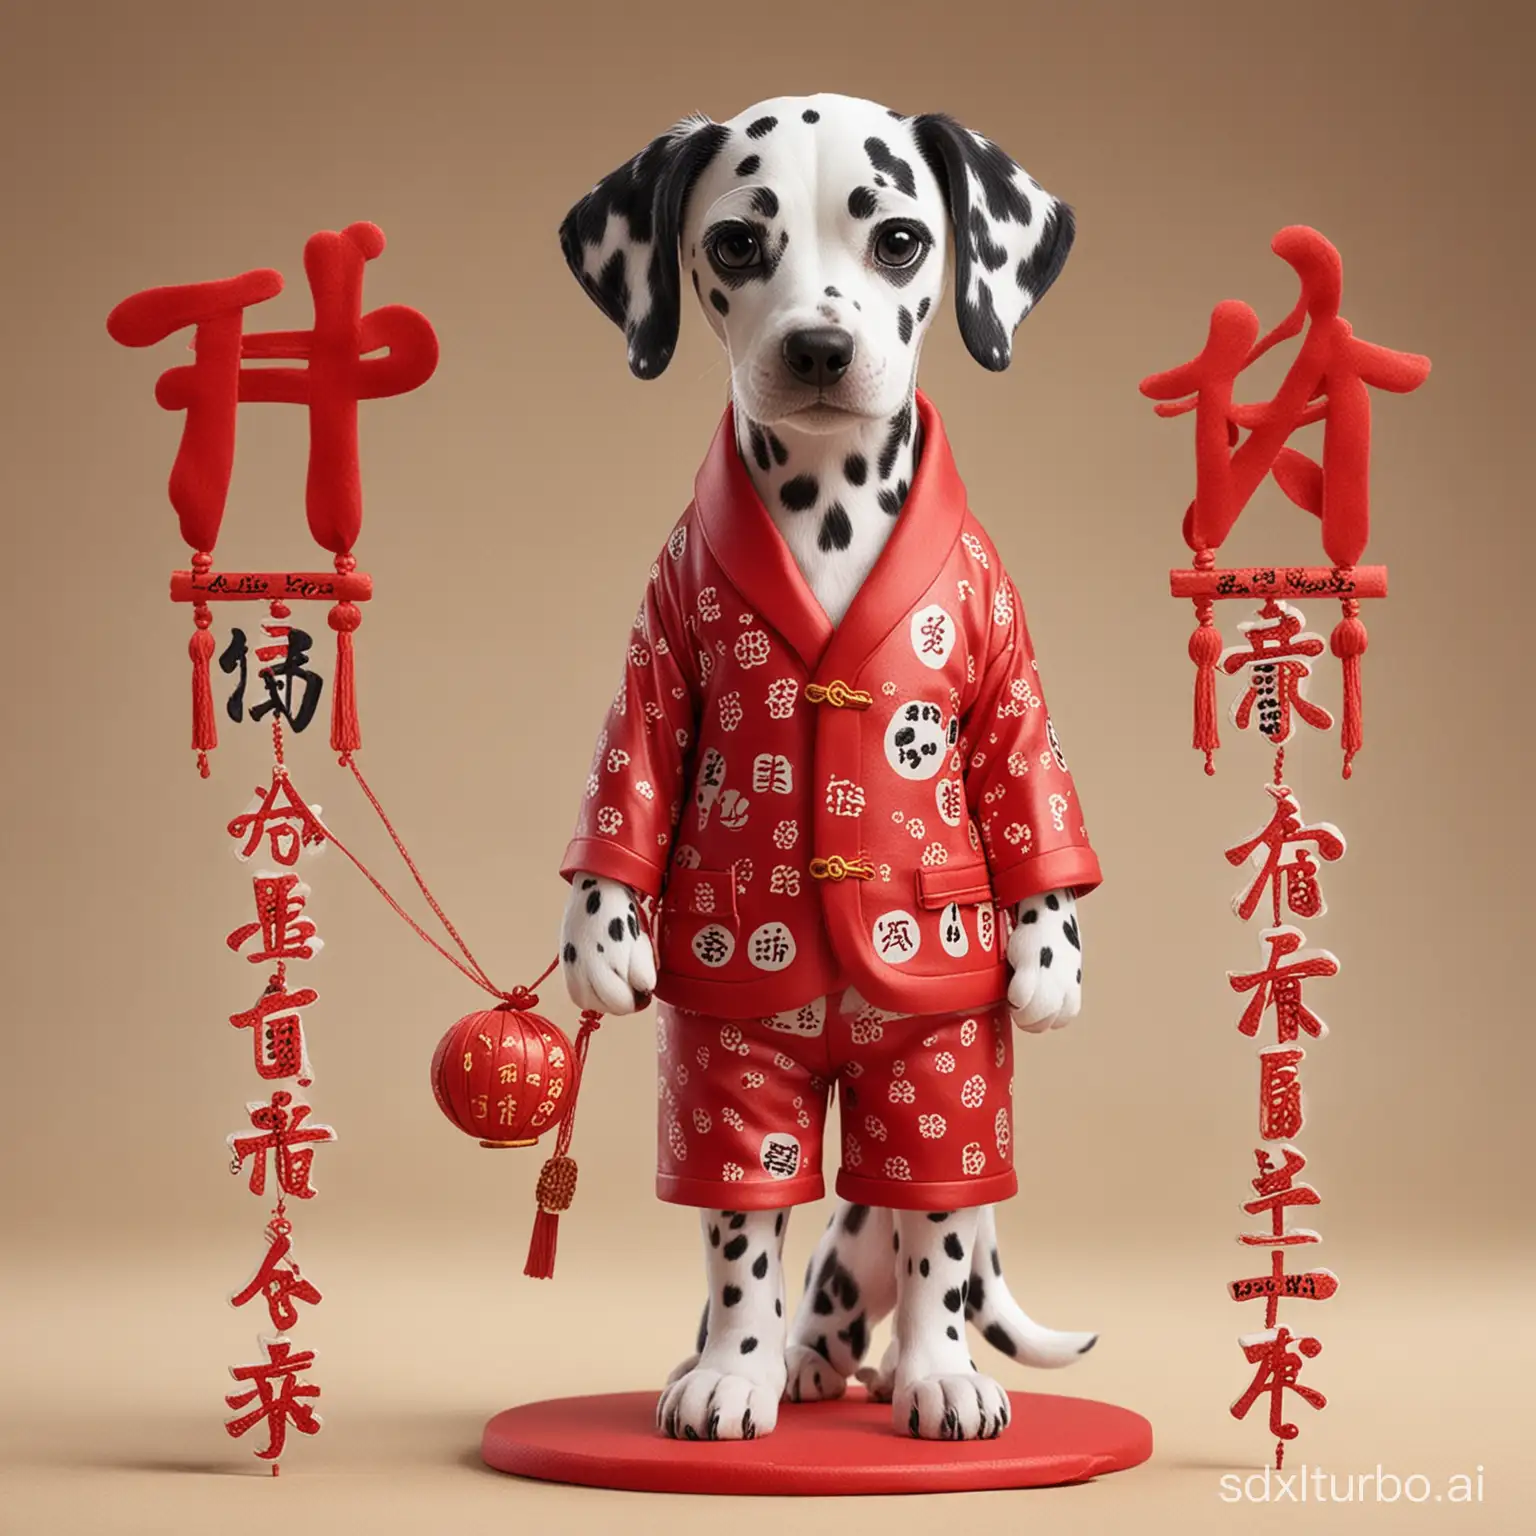 Adorable-Dalmatian-in-Red-Suit-with-Chinese-New-Year-Fortune